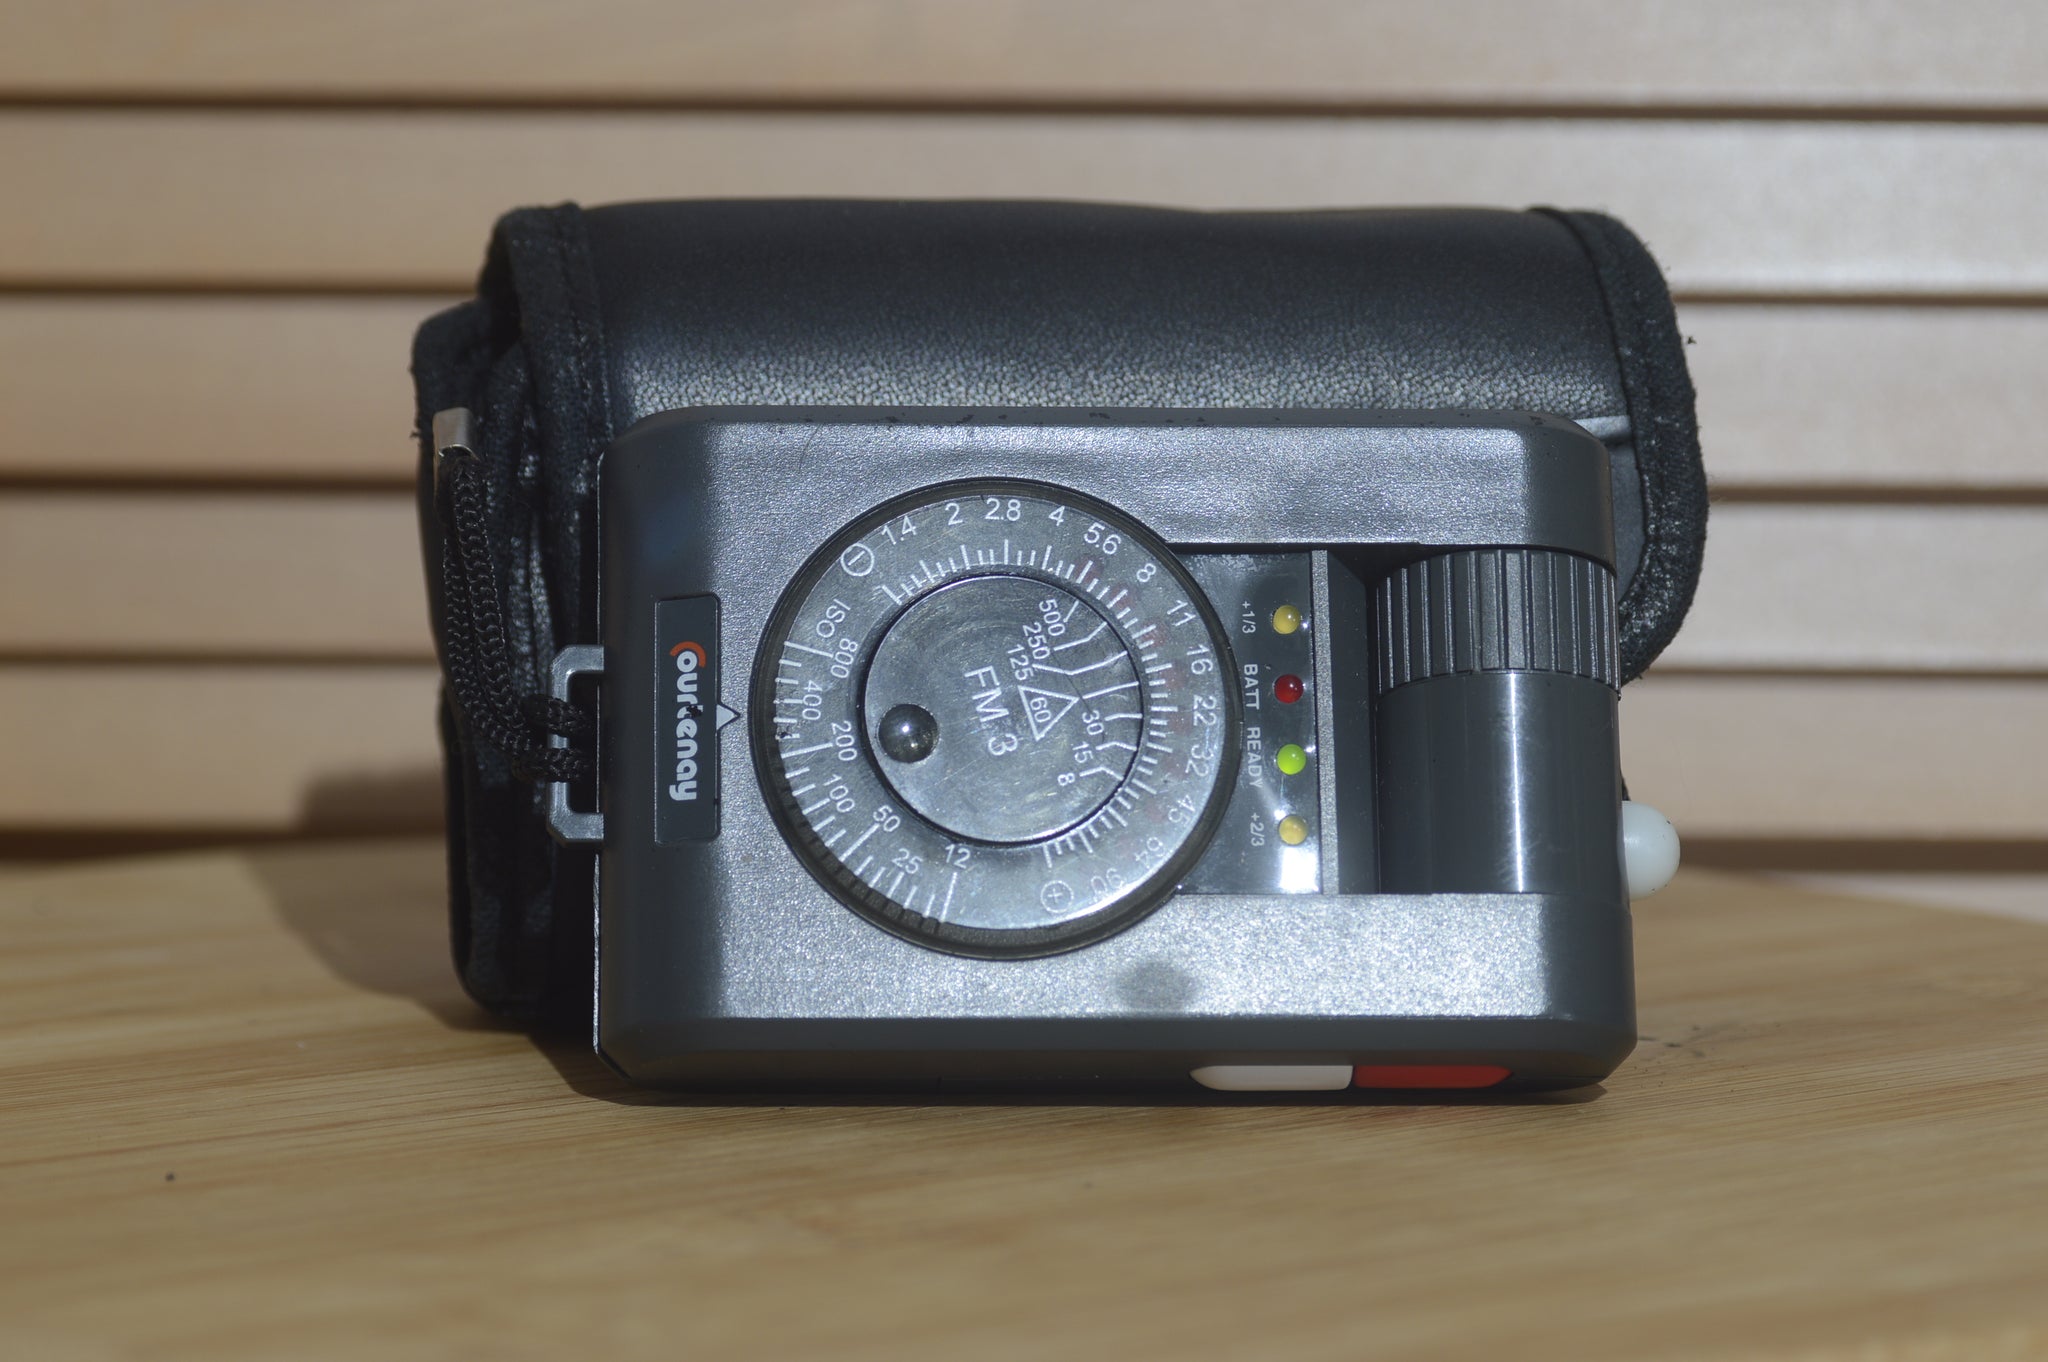 Beautiful Courtenay Flashmaster 2/3 Flash meter with dedicated case. Tested and working perfectly. - RewindCameras quality vintage cameras, fully tested and serviced